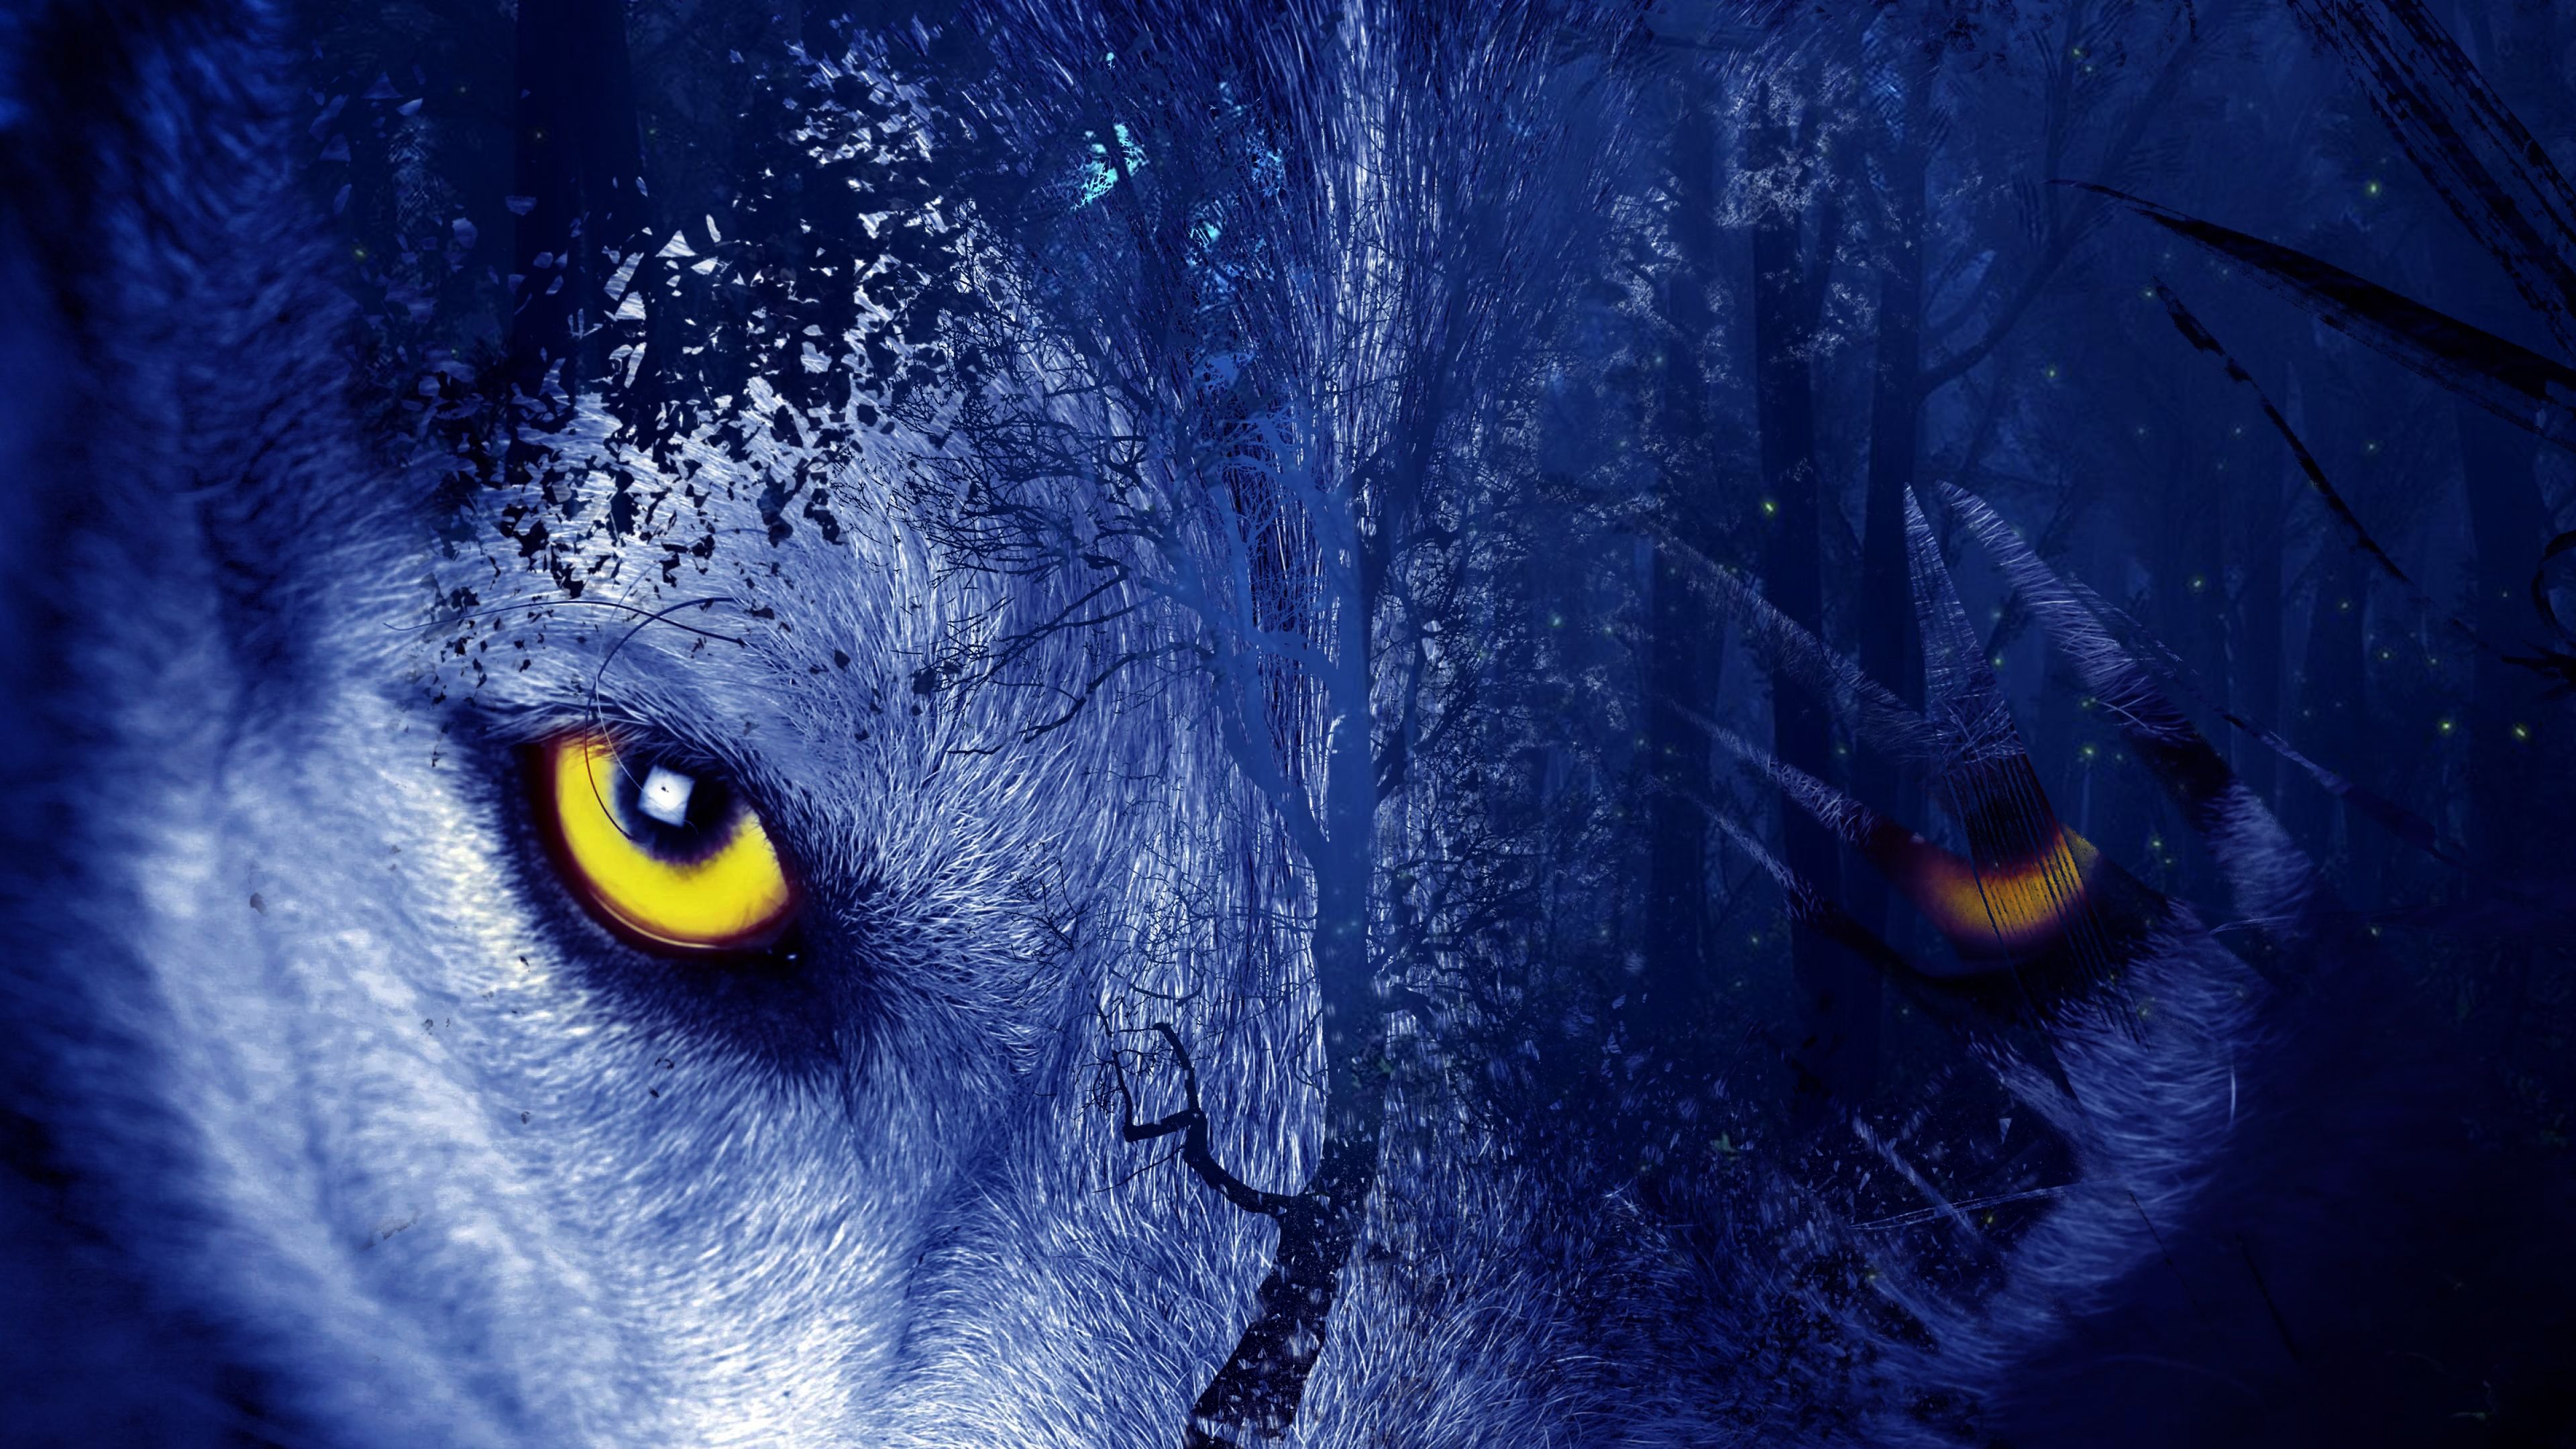 Download 3840x2160 Wolf Eyes, Forest, Artistic Wallpaper for UHD